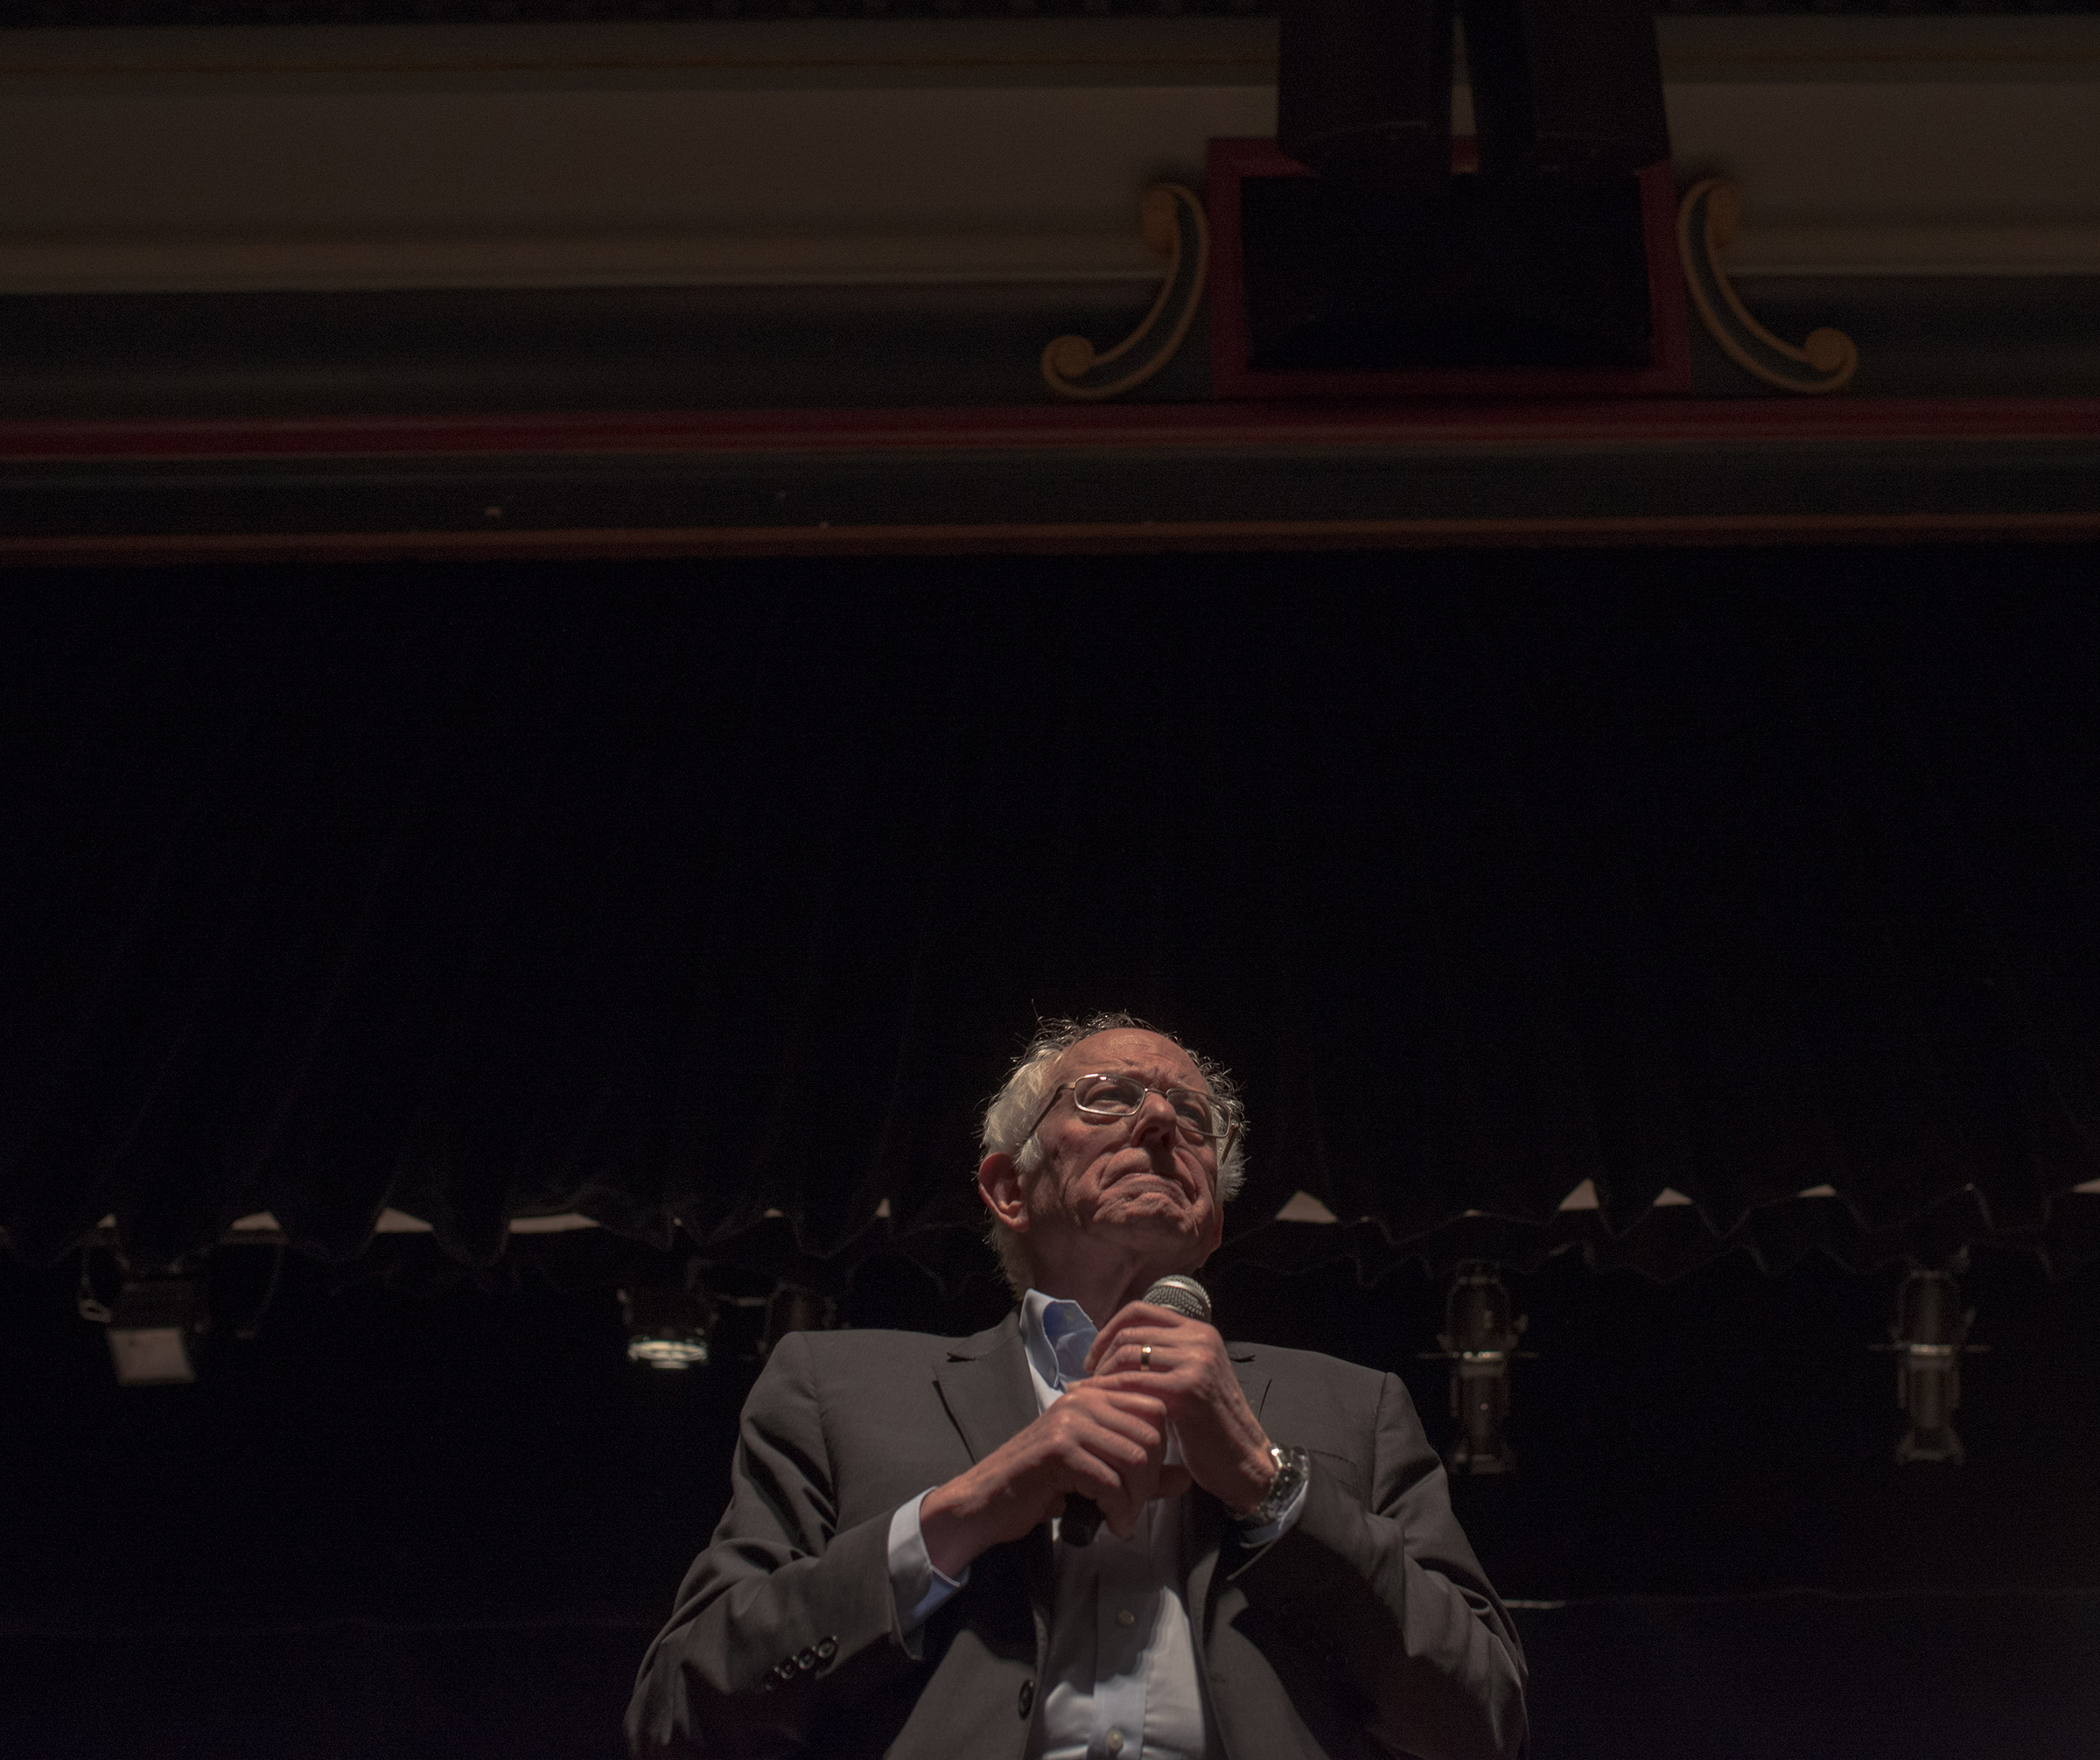 Sanders addresses supporters at a rally in Ames on Jan. 26 (Photograph by September Dawn Bottoms for TIME)